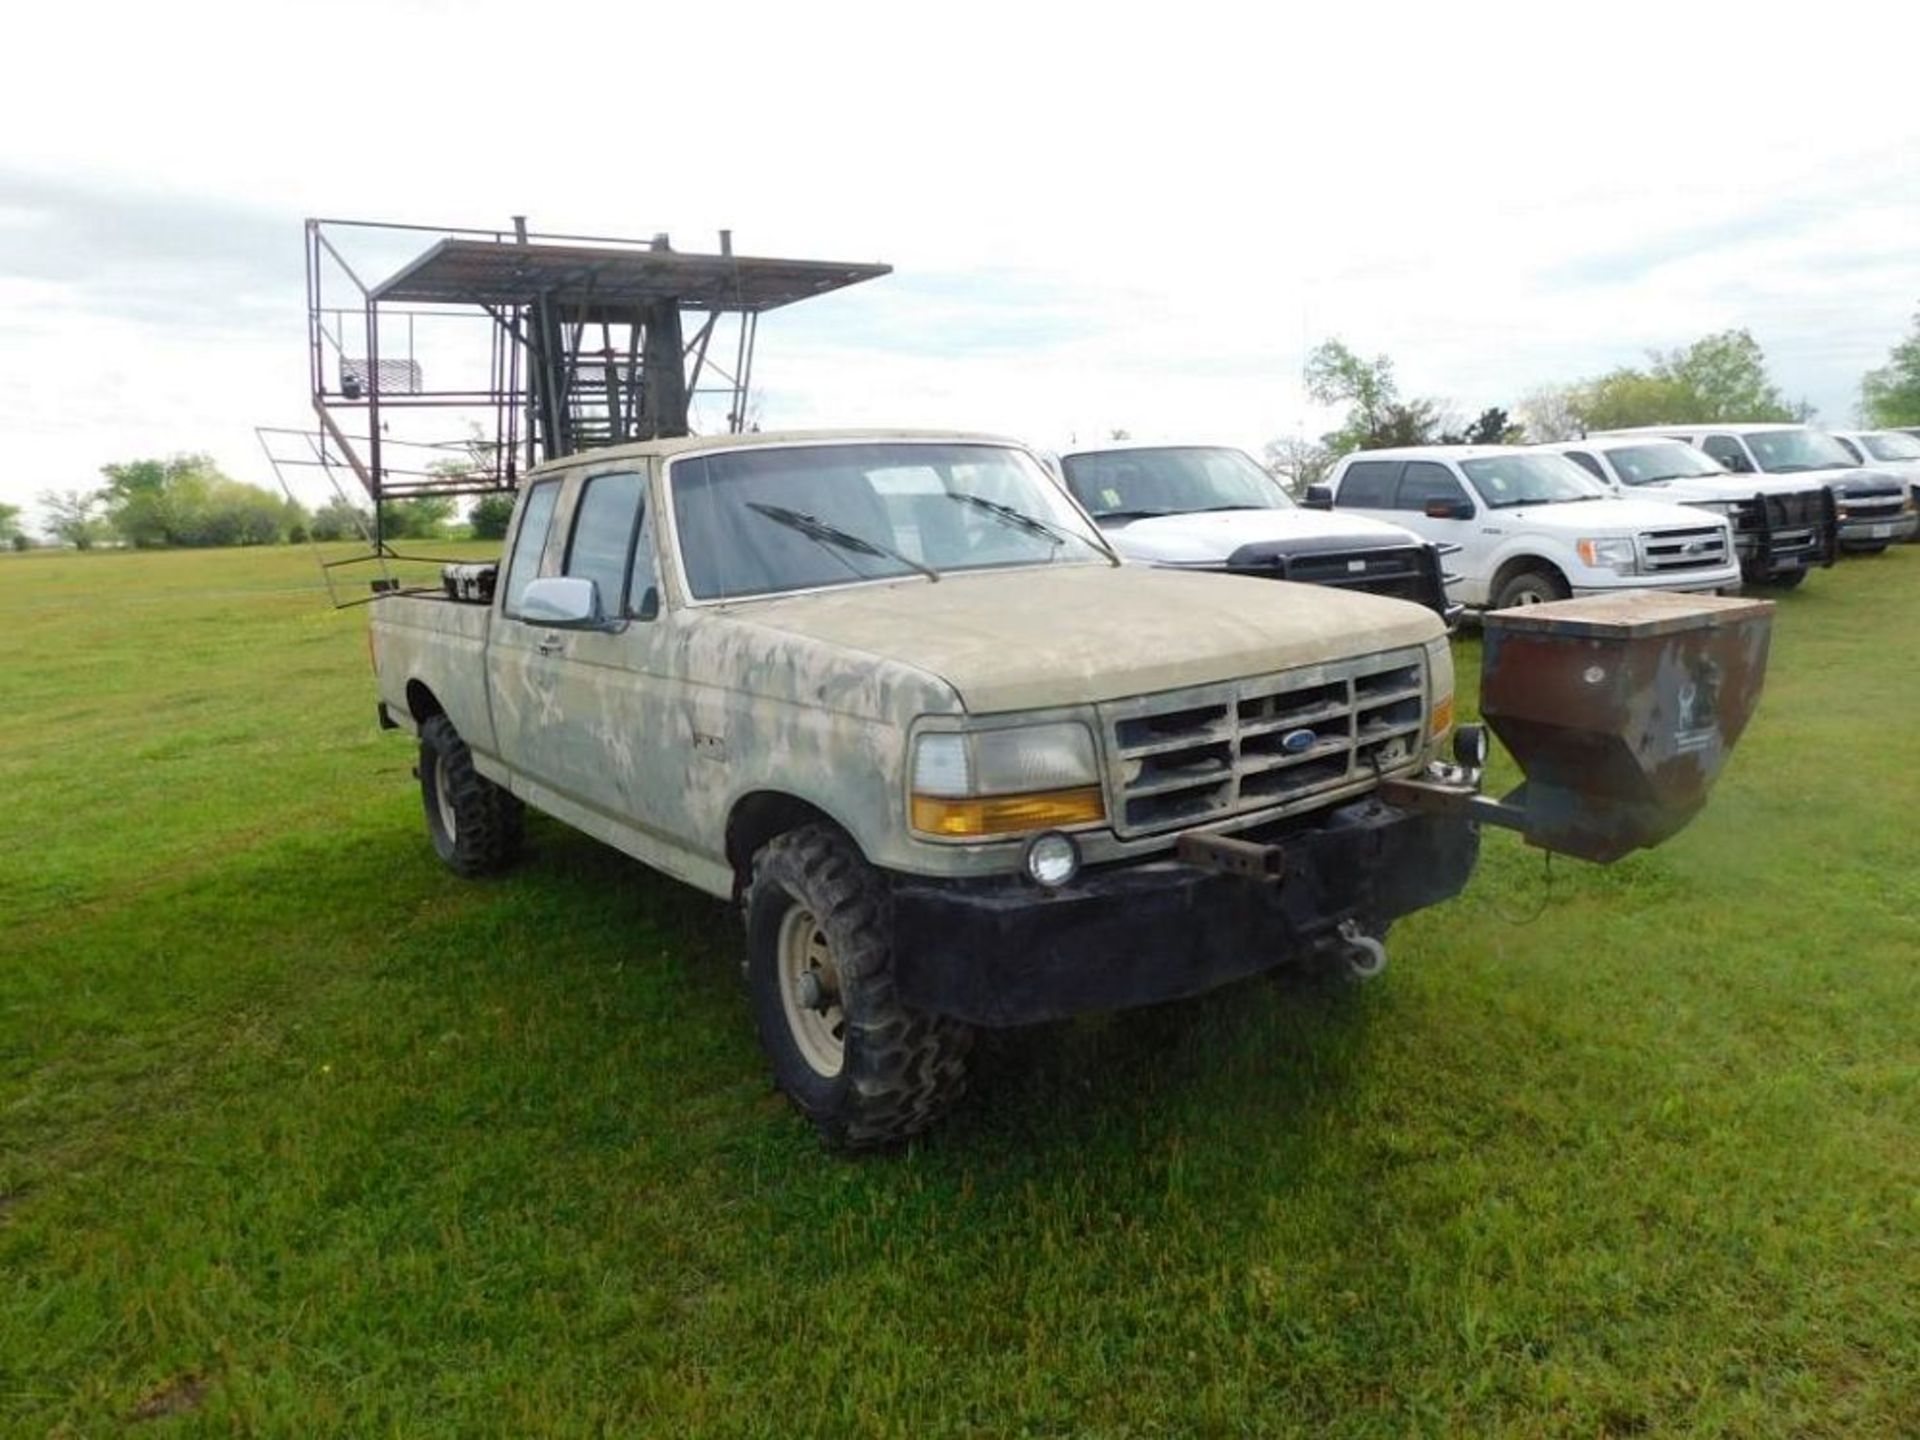 1993 Ford F-150 4x4 Extended Cab Hunting Truck with Platform & Winch, VIN 1FTEX14N1PKA60848, 6-1/2 f - Image 2 of 4